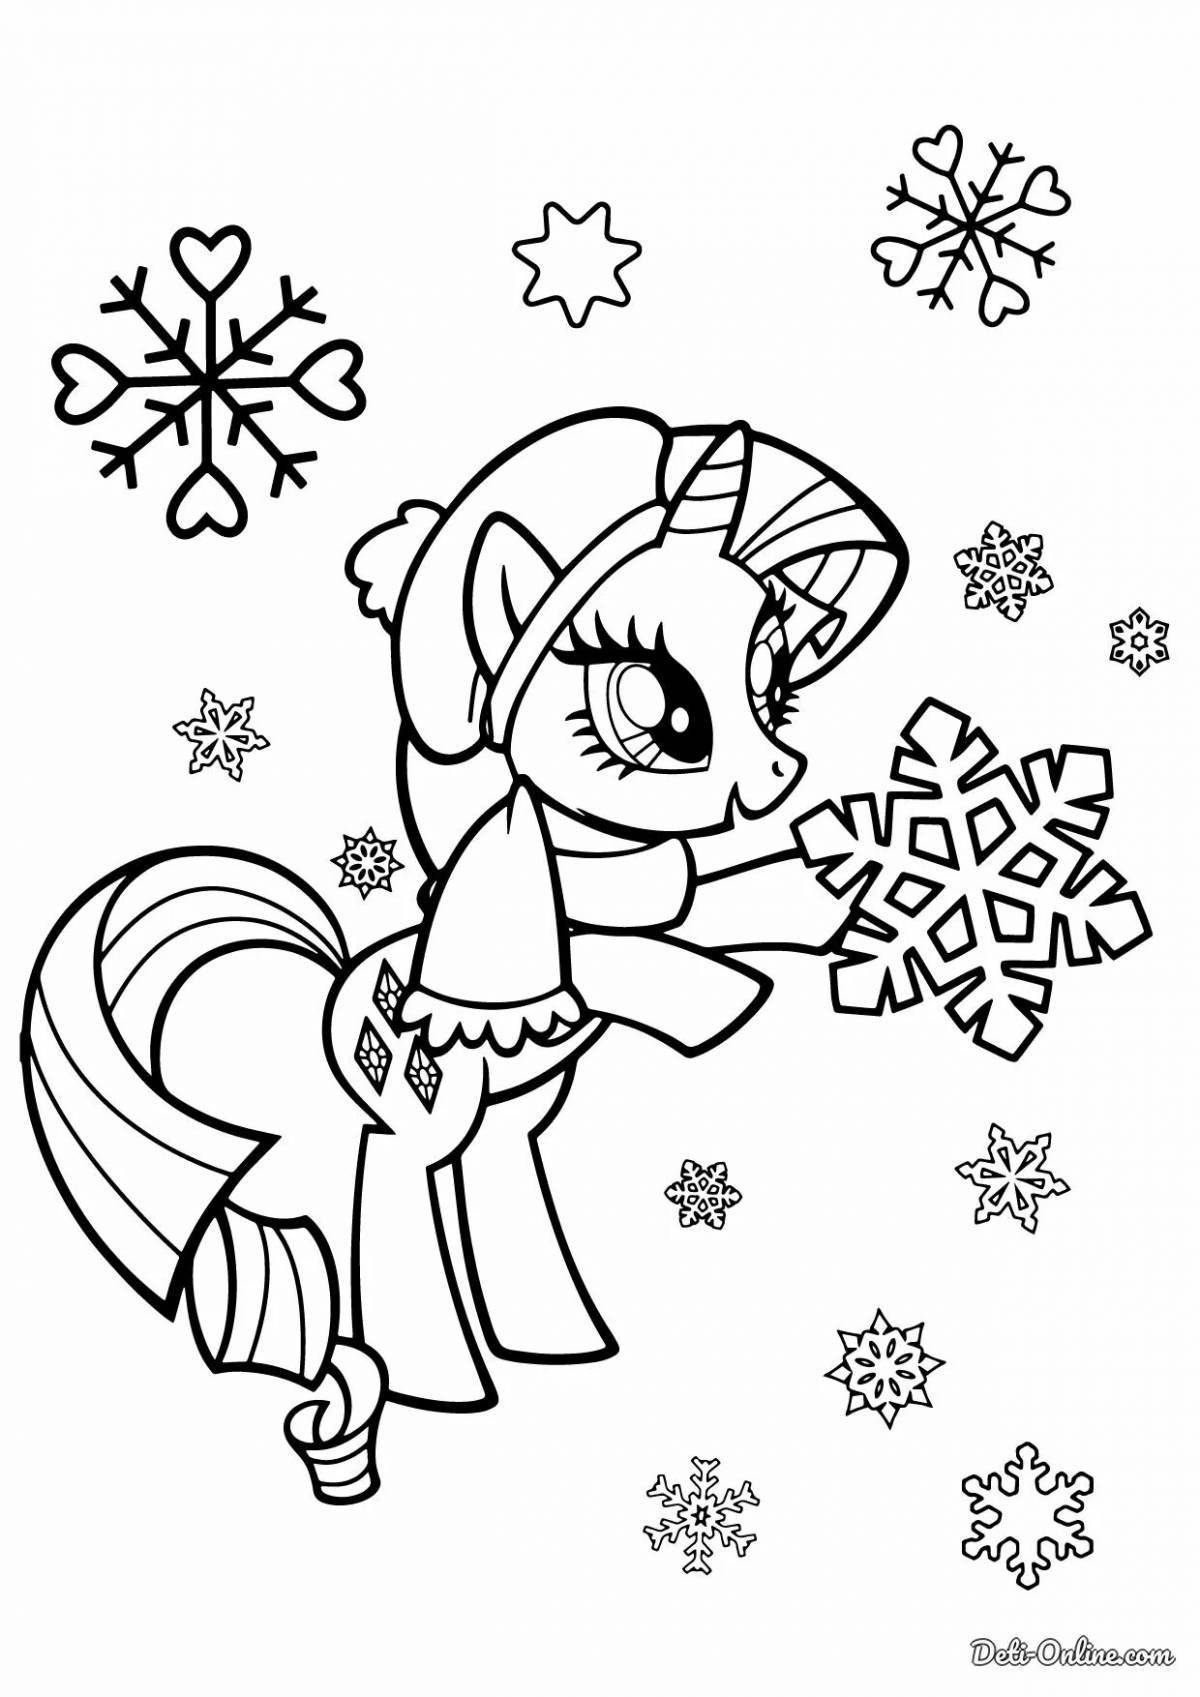 Funny Christmas coloring book for girls 10 years old